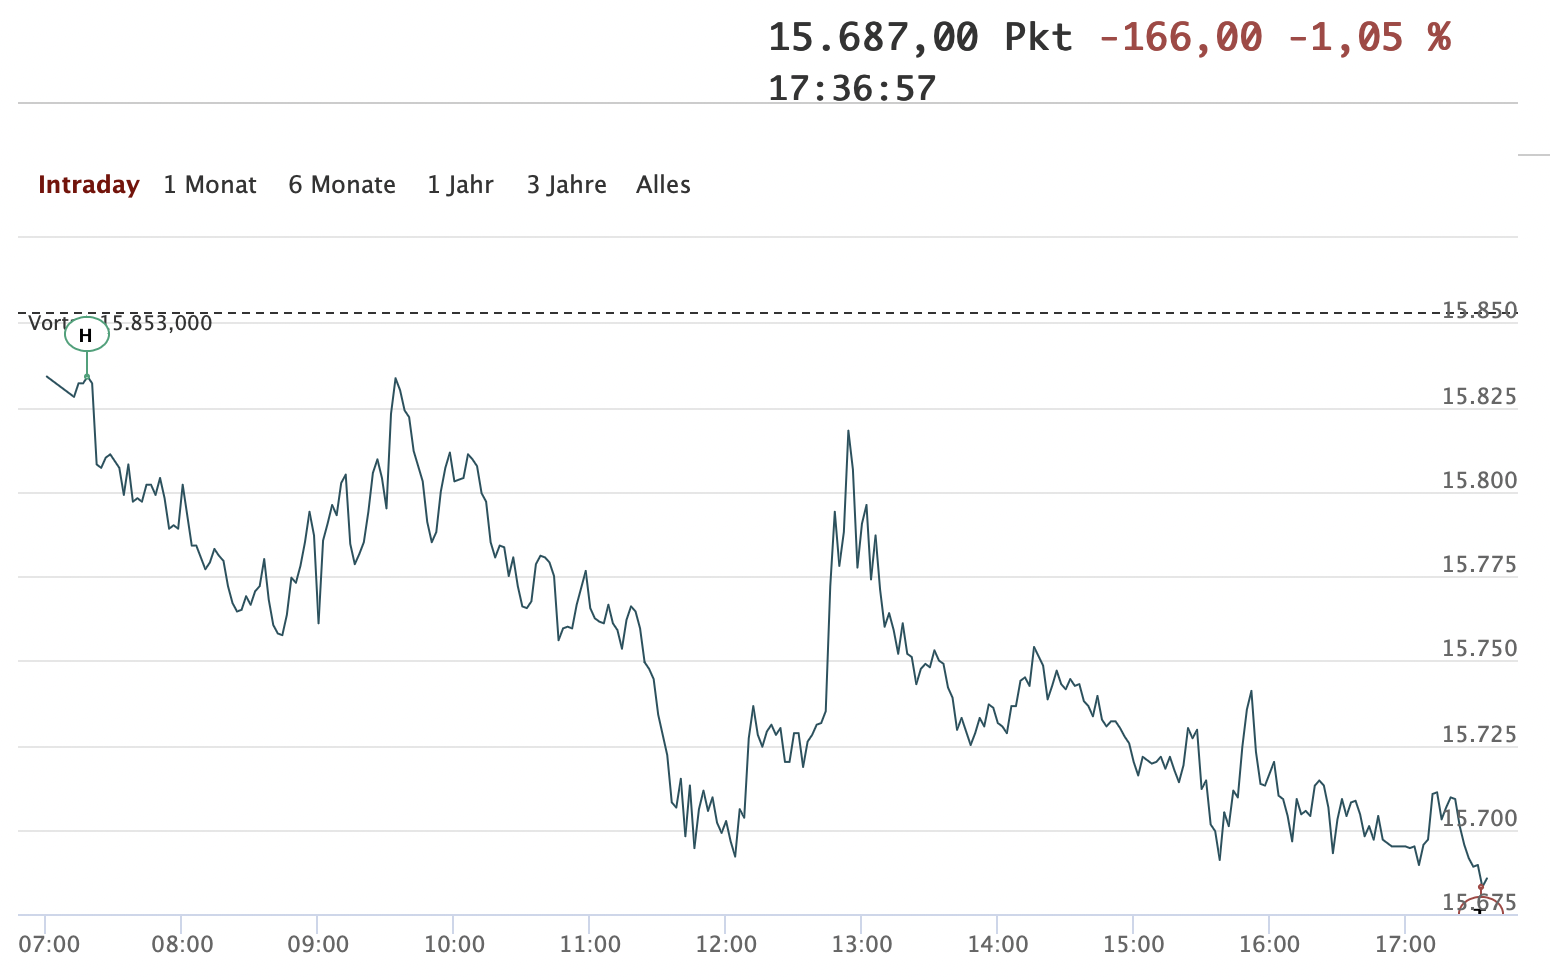 20211208-dax-intraday.png